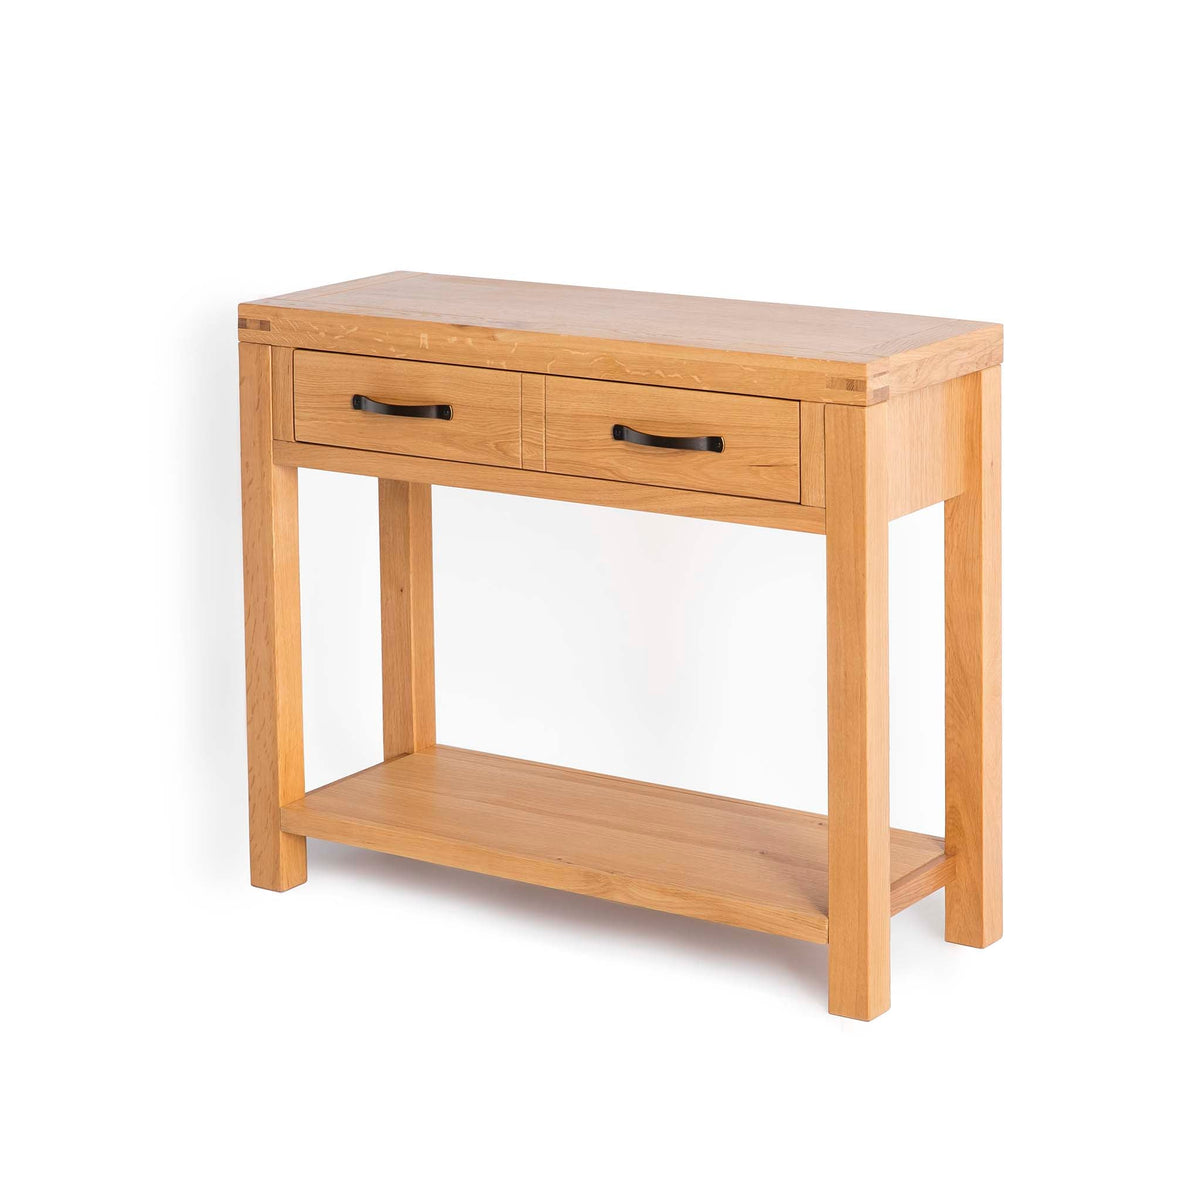  Abbey Waxed Oak Console Table with Drawer - Side view